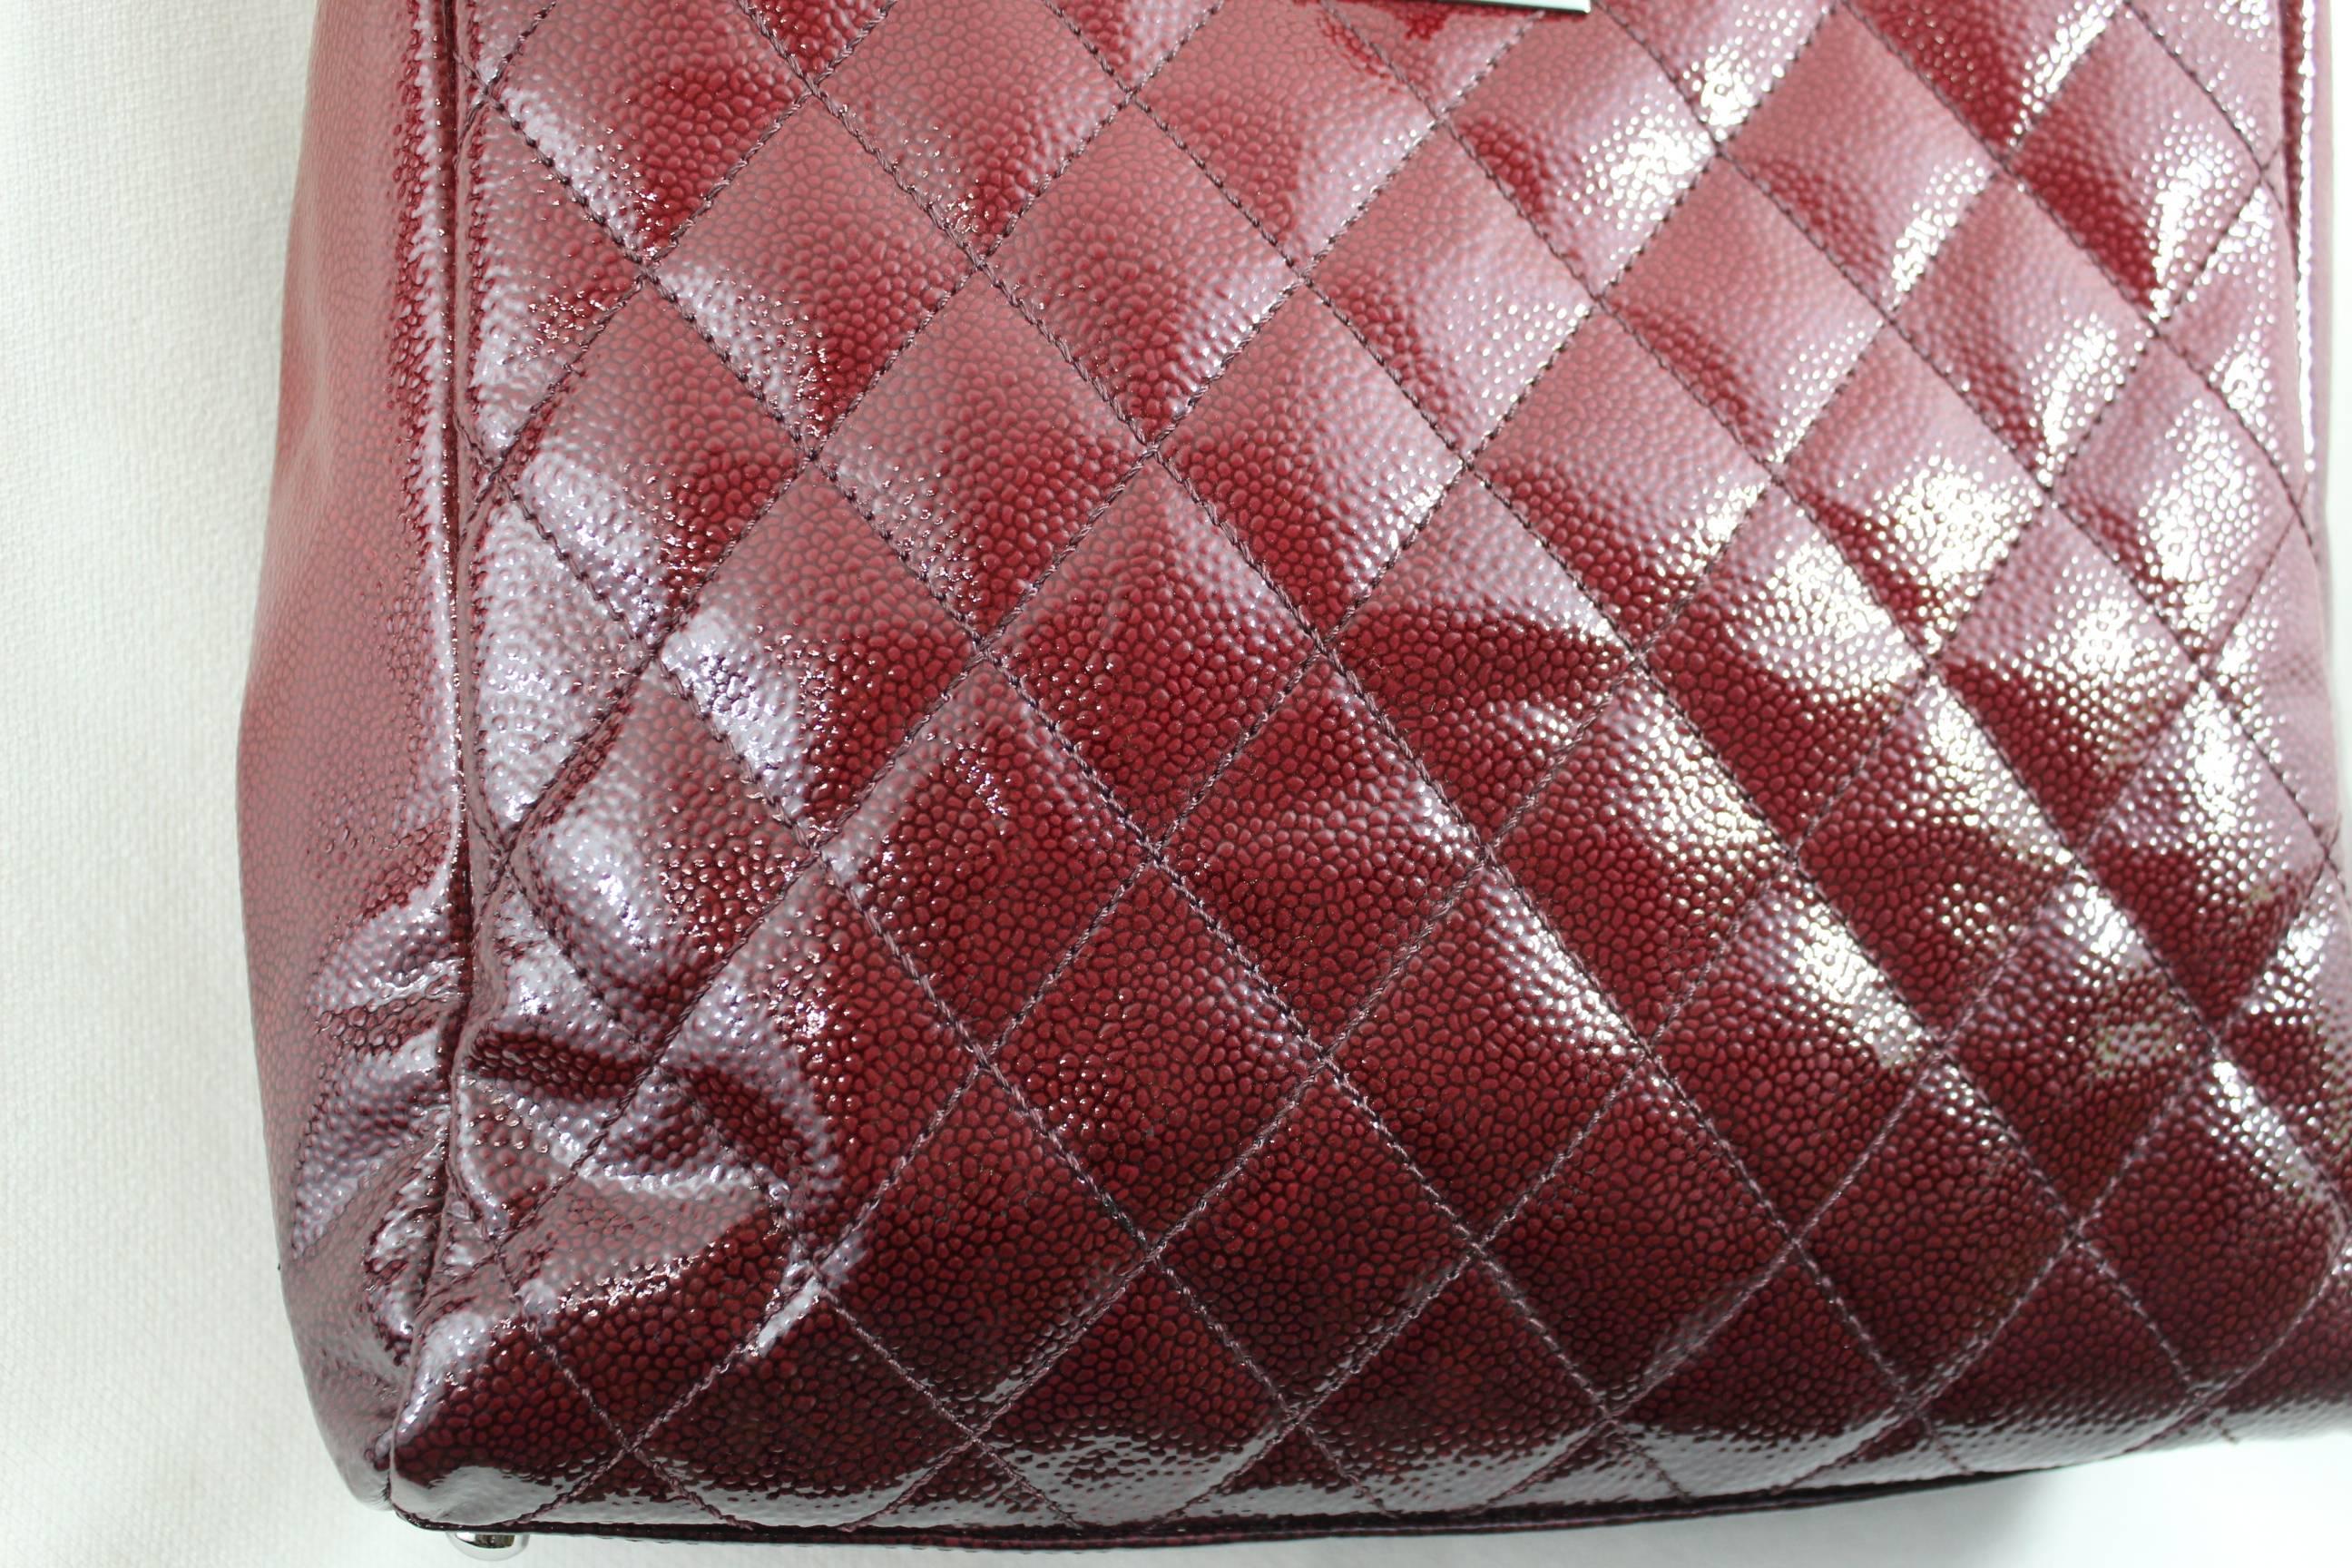 Amazing Chanel bag in differnet shades of red from bordeaux to red.

Really good condition.

Silver hardware

2.55 clasp.

No cad or hologramme insdie as the label where the sticker was glued has been removed.

Size 9,5 x10 inches